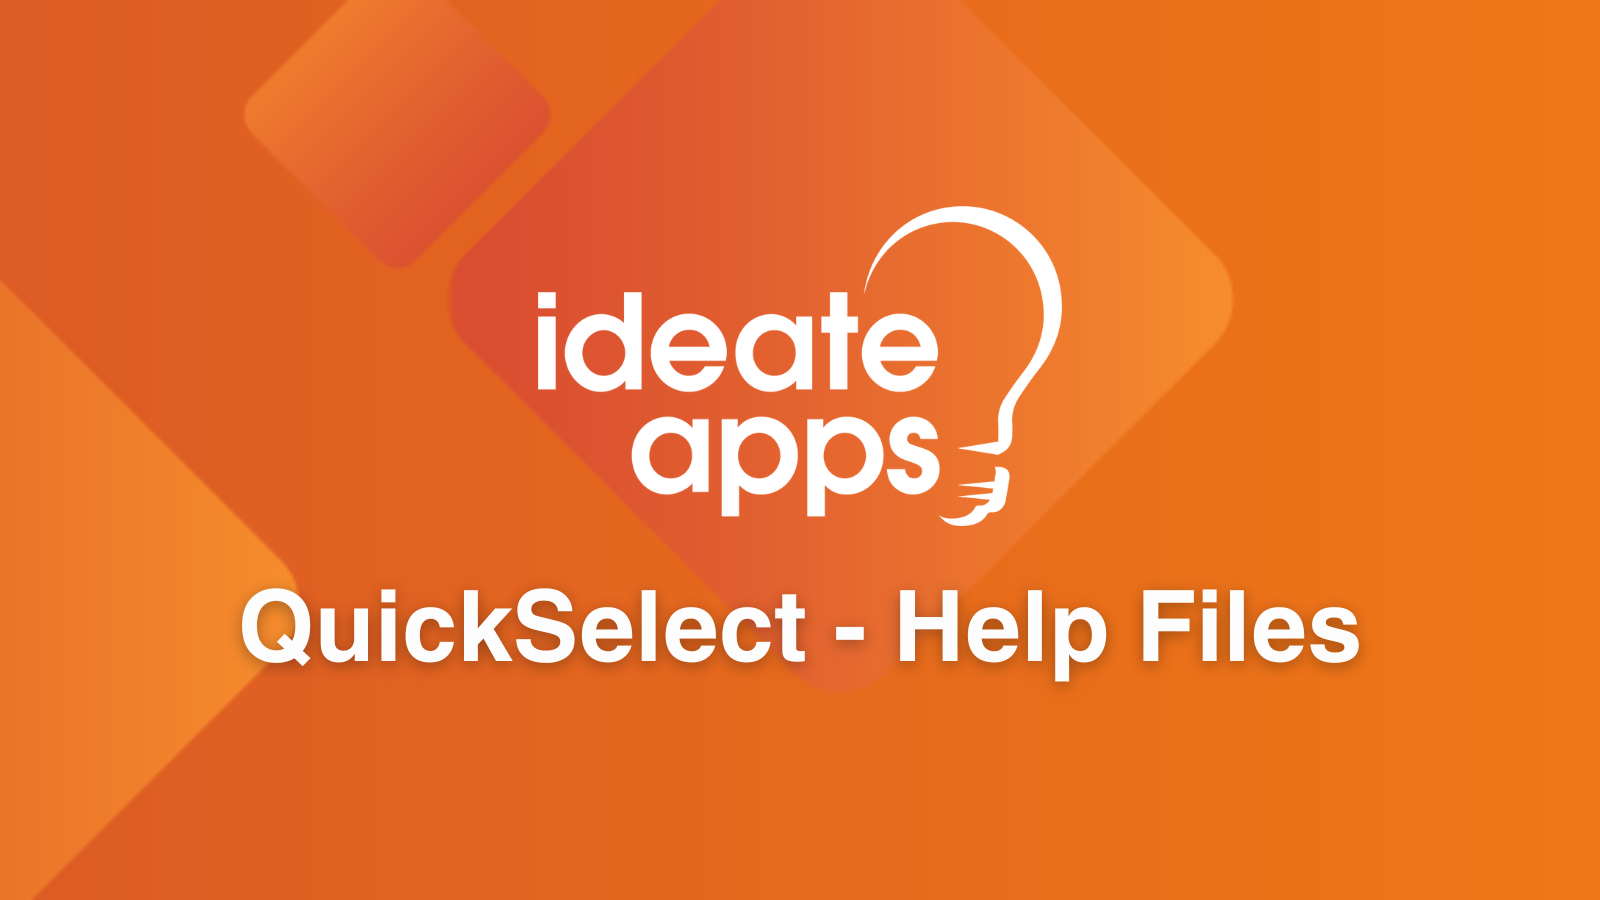 Search IdeateApps QuickSelect Help Files